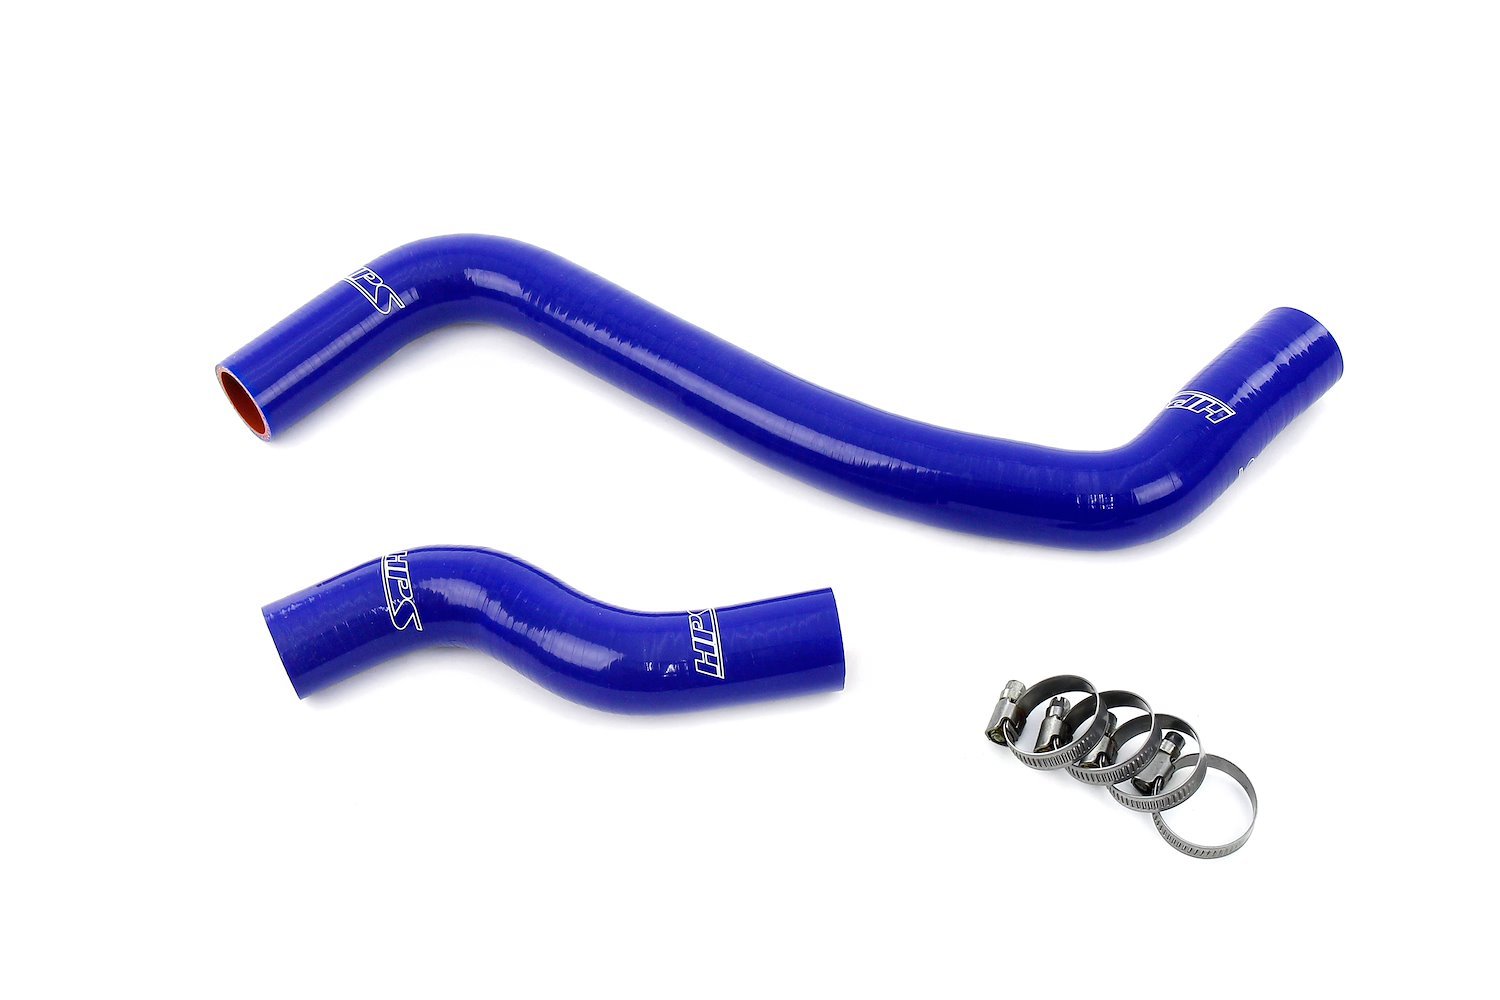 57-2124-BLUE Radiator Hose Kit, 3-Ply Reinforced Silicone, Replaces Rubber Radiator Coolant Hoses